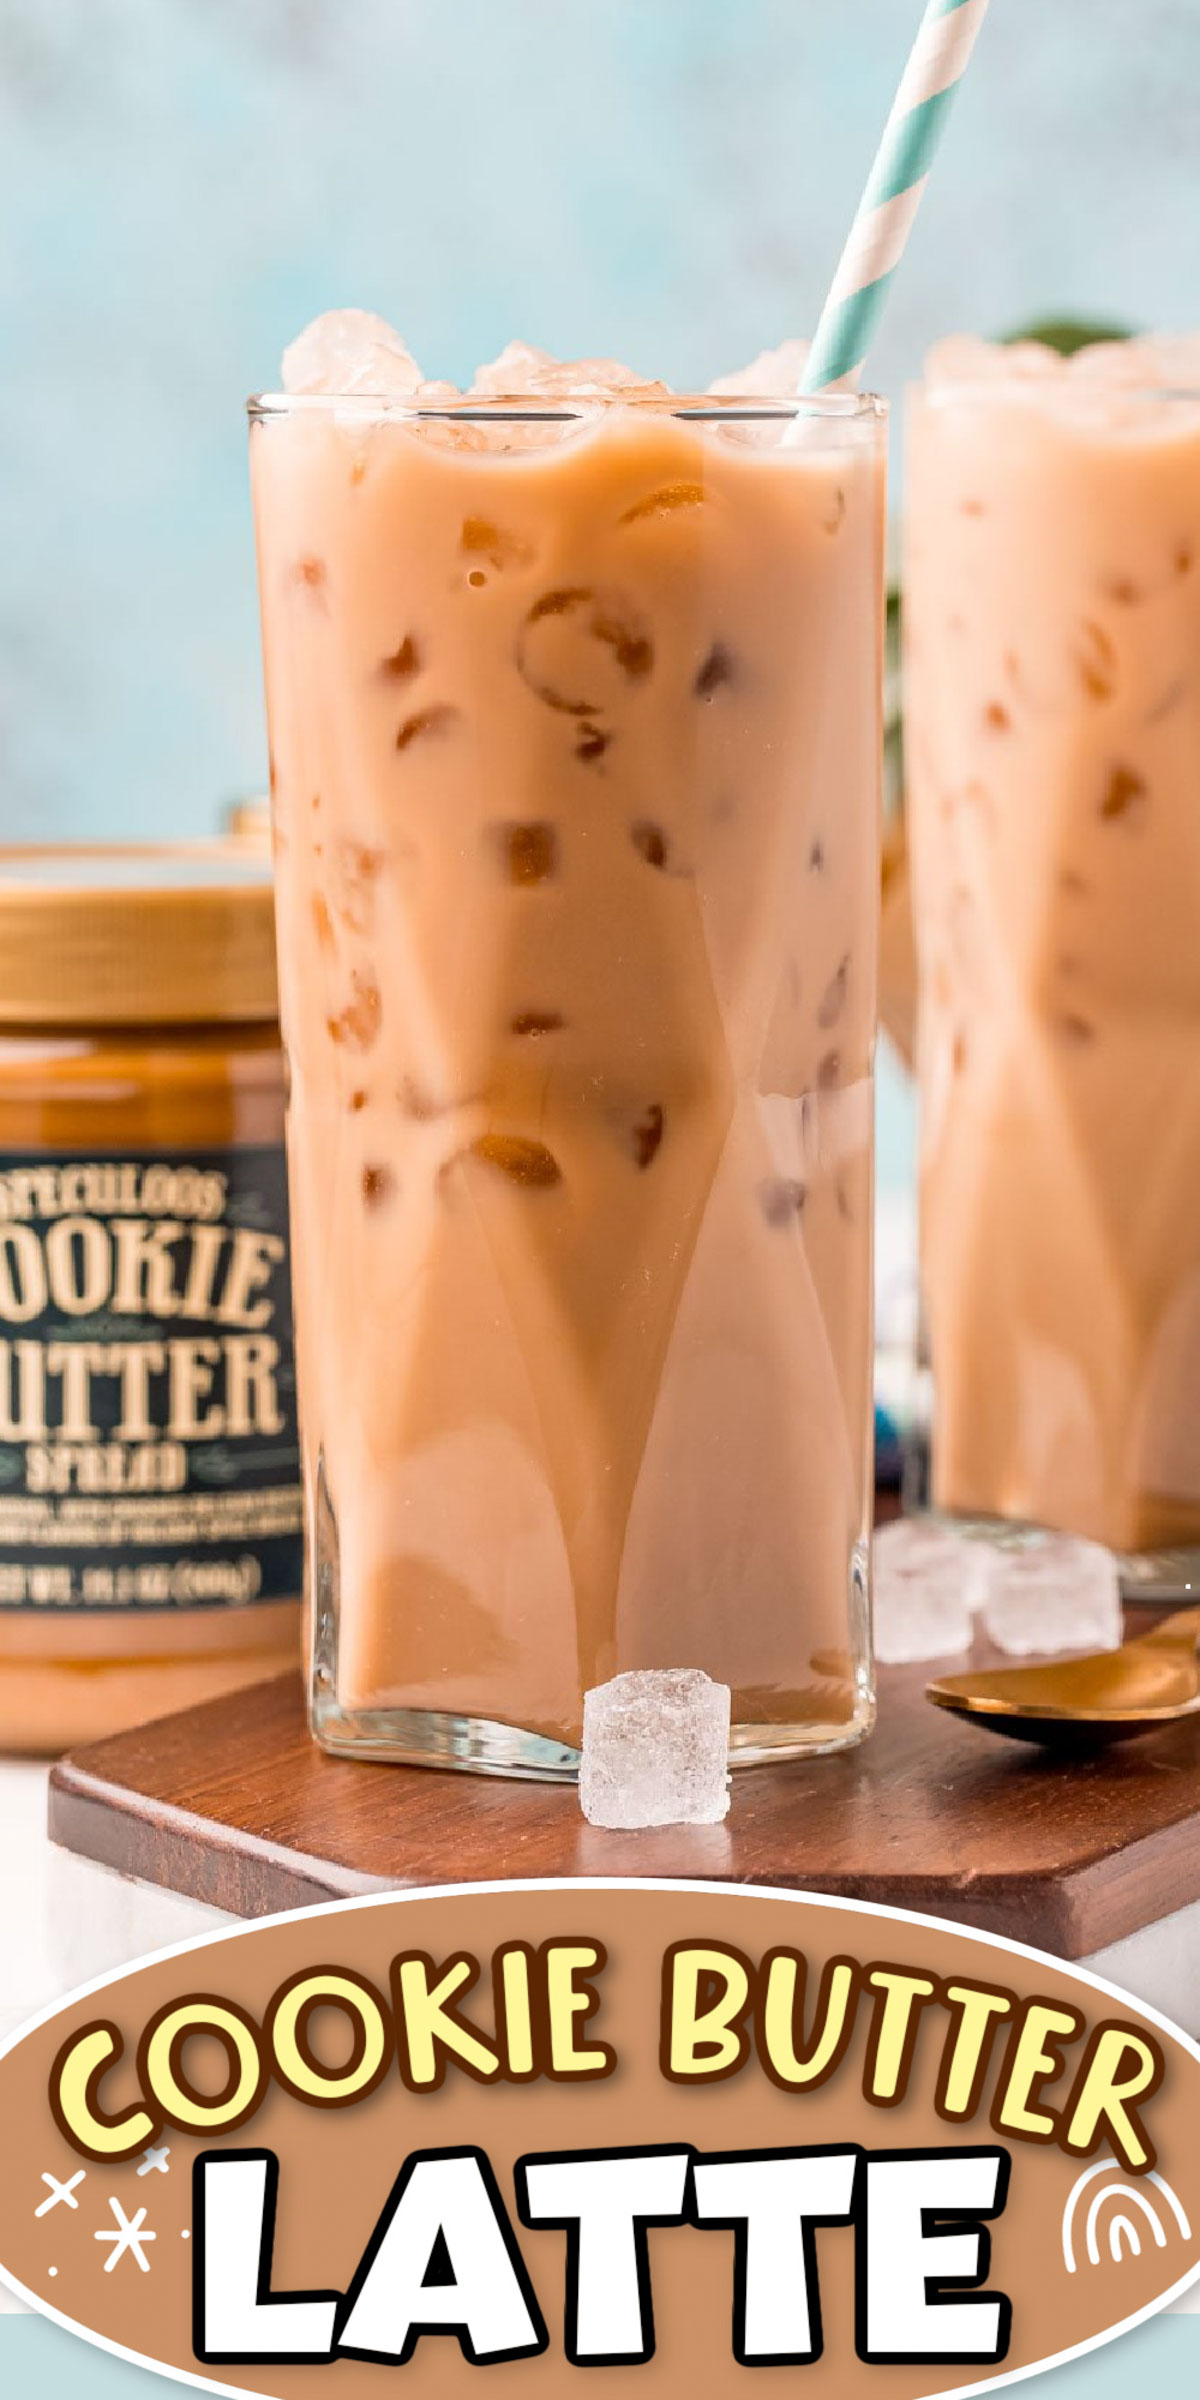 This Cookie Butter Latte is another Starbucks Secret Menu recipe taking TikTok by storm! It's sweet, creamy, and tastes just like Trader Joe's Speculoos Cookie Butter! via @sugarandsoulco